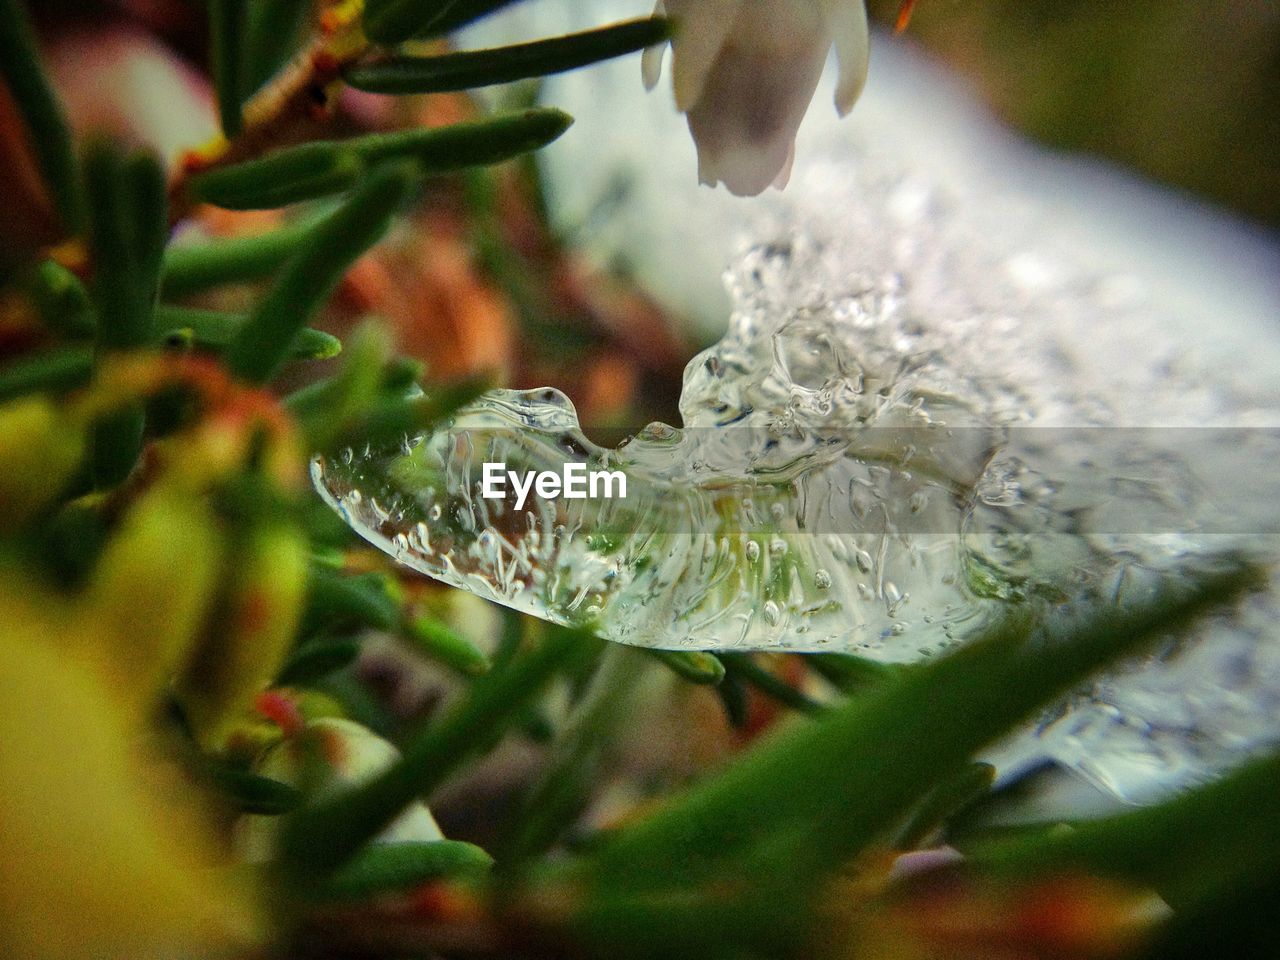 Close-up of plants and ice crystals